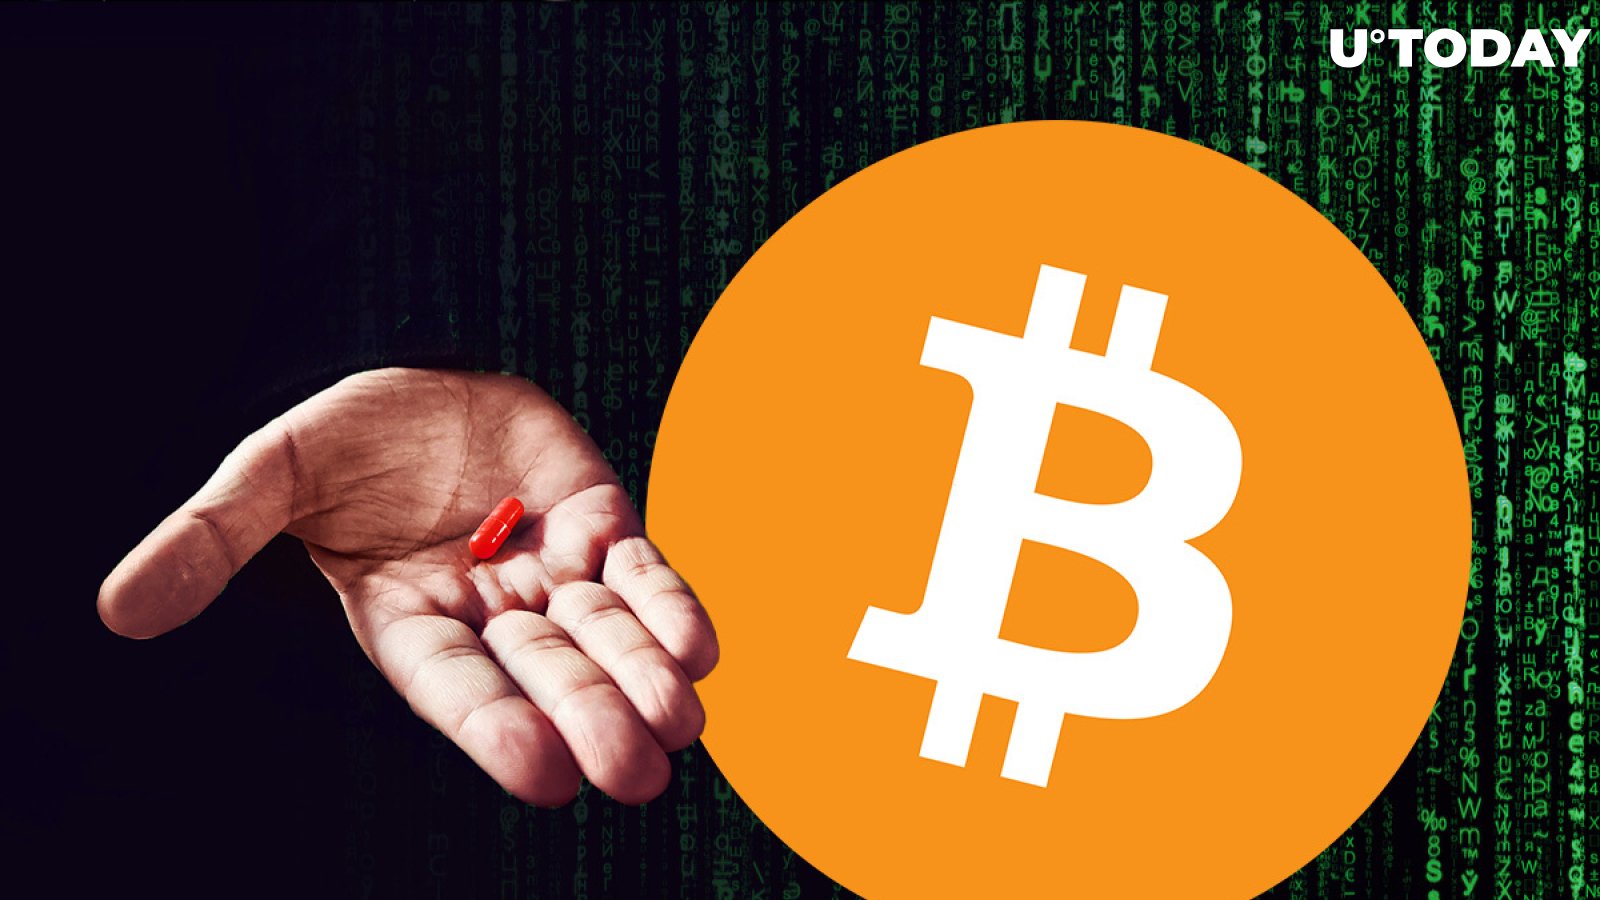 Bitcoin Is "Red Pill" for 3.5 Billion People: Wellington-Altus Private Wealth Research